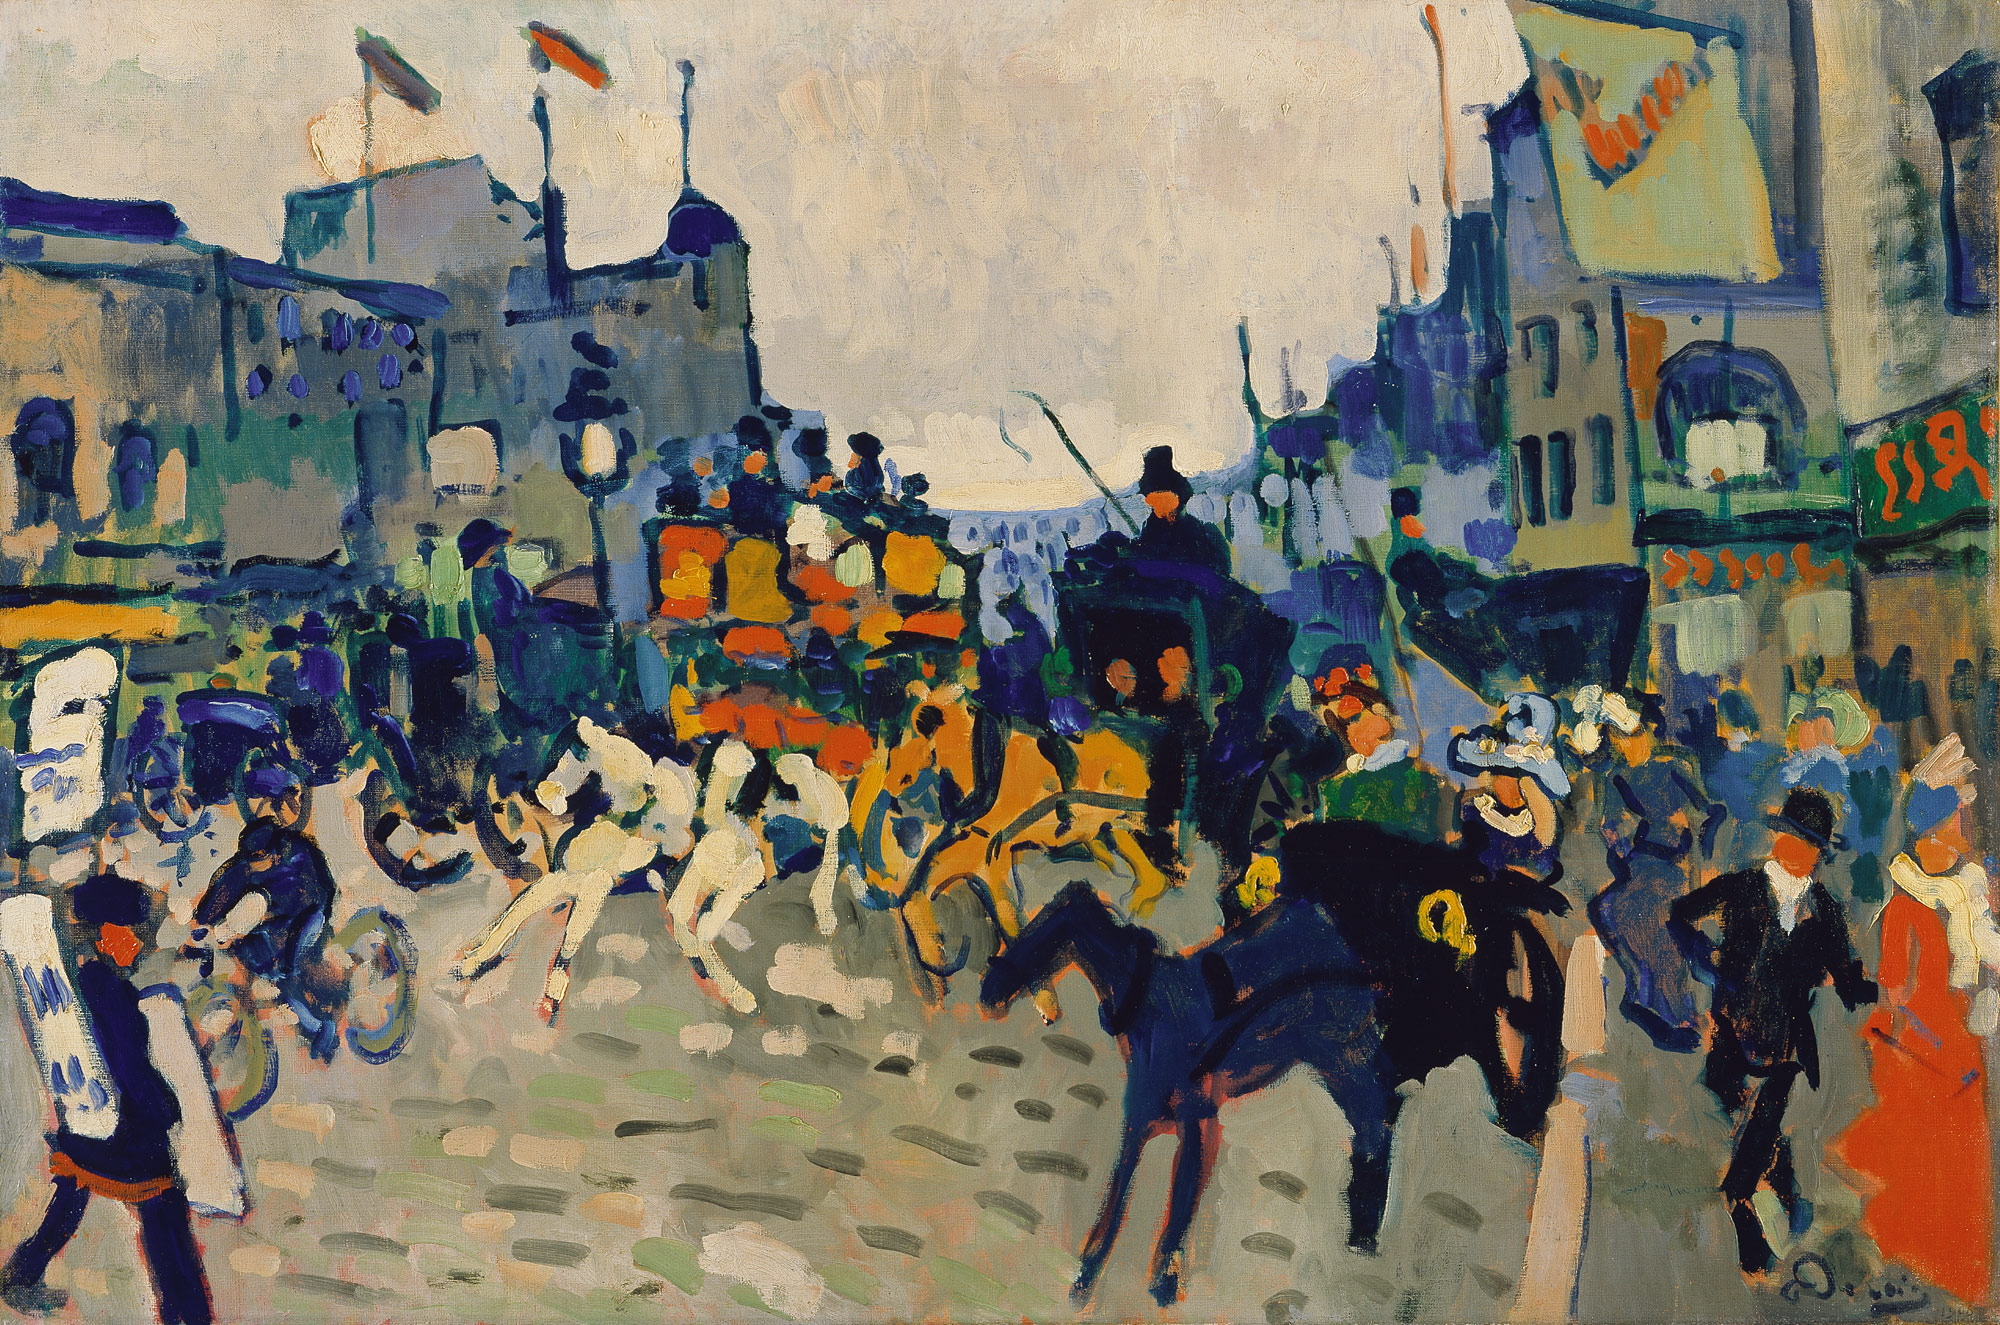 A street scene with horse drawn carriages and people walking on the sidewalks 